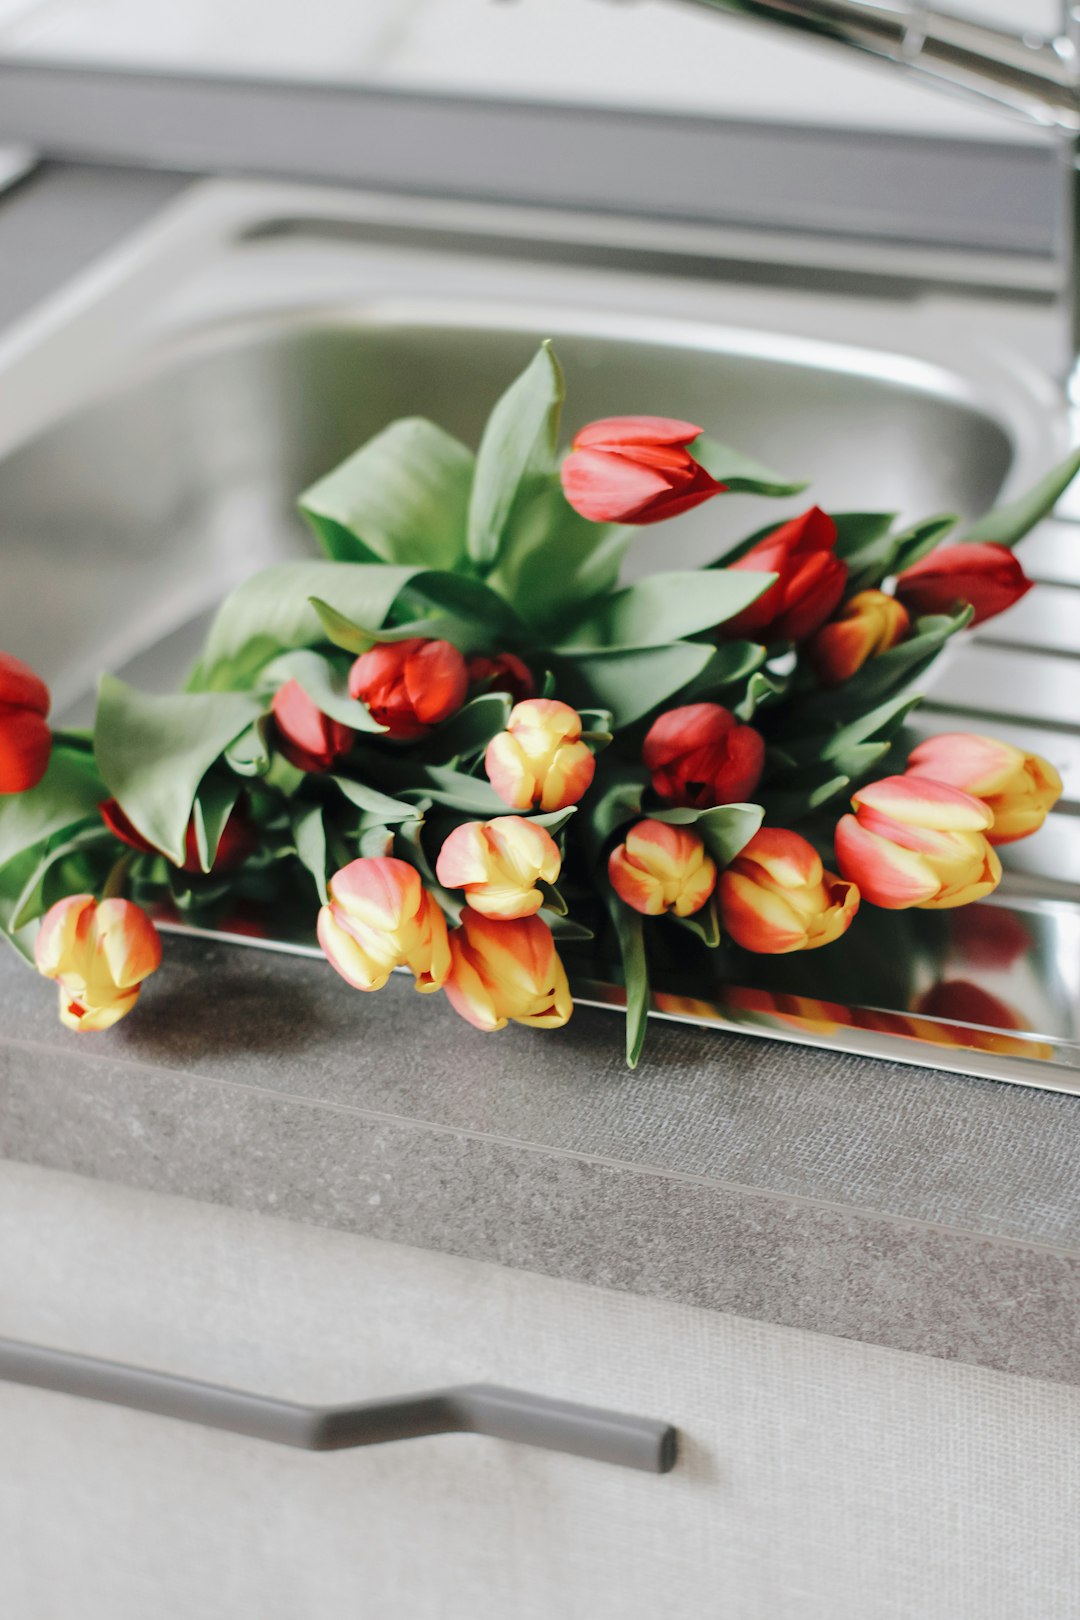 yellow and red tulips in white ceramic bathtub